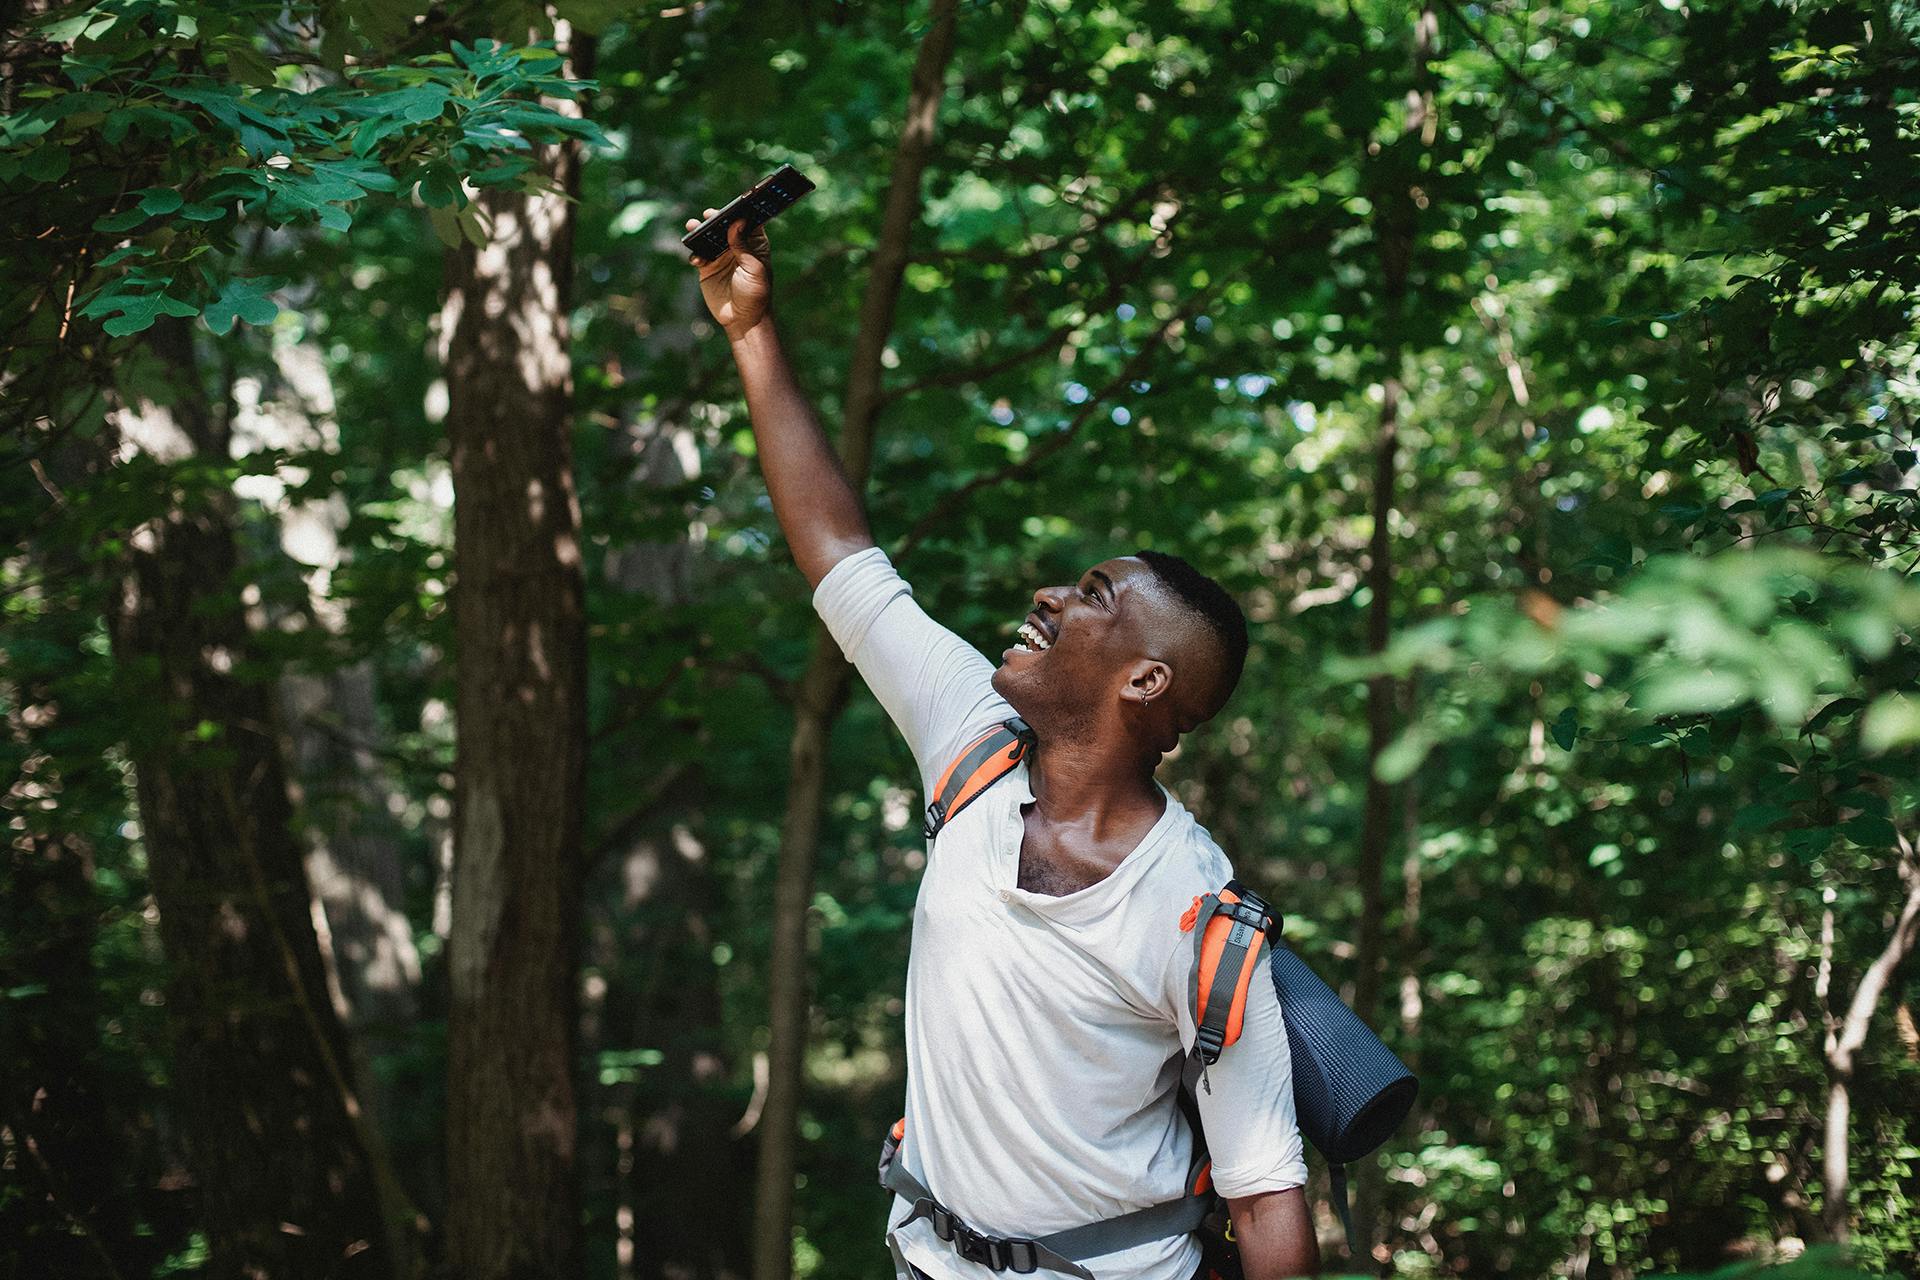 A man holds his mobile phone up in the woods, searching for internet connection